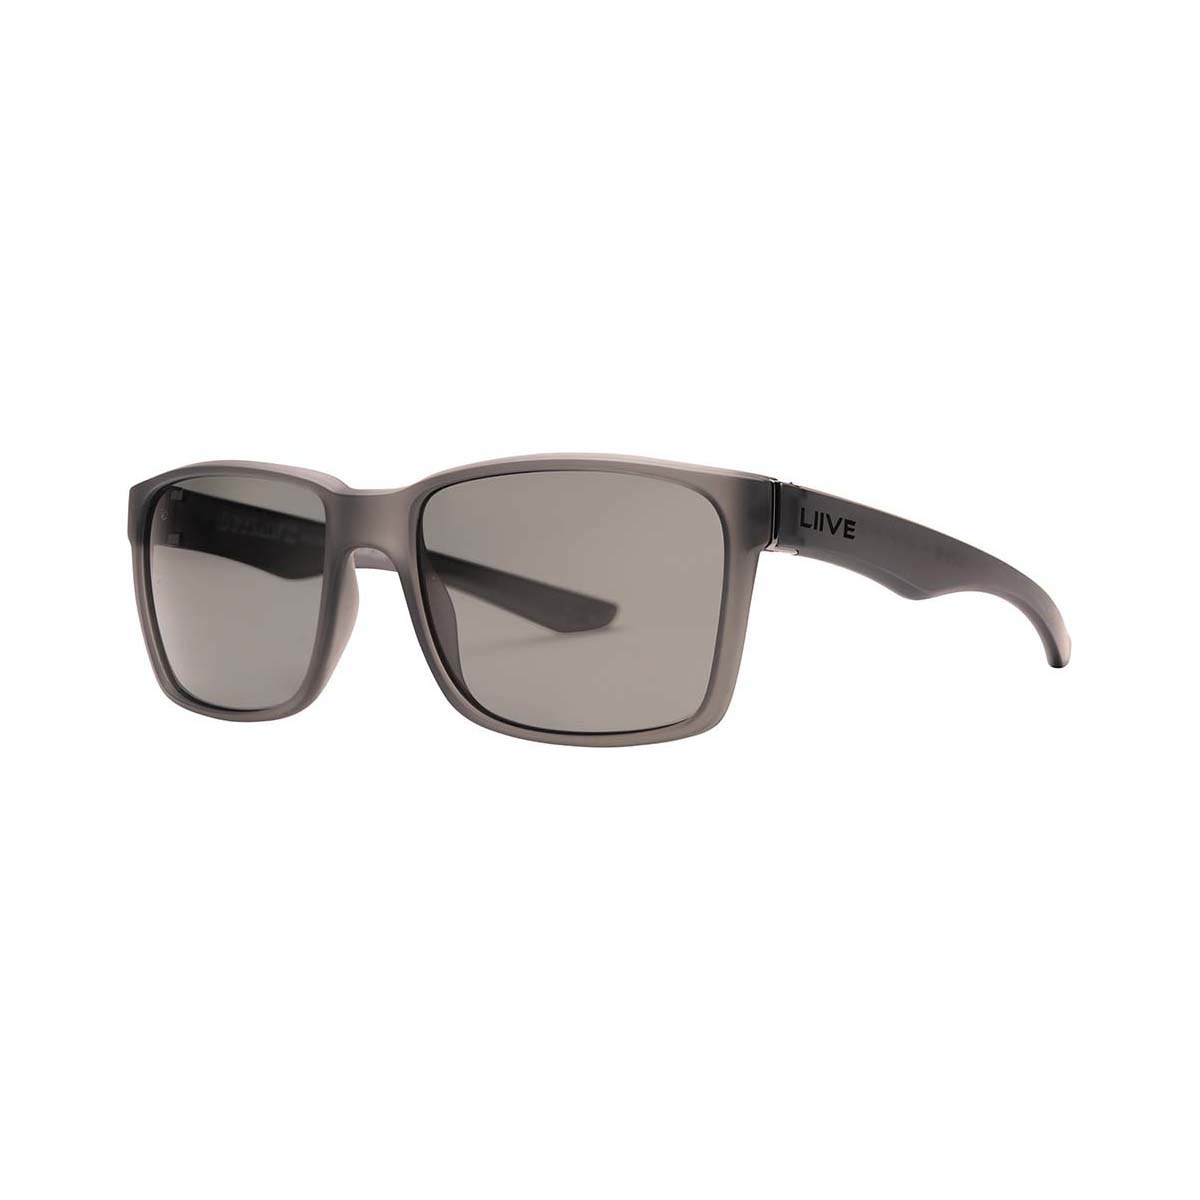 Liive X Outlaw Men's Polarised Sunglasses Black/Grey with Grey Lens